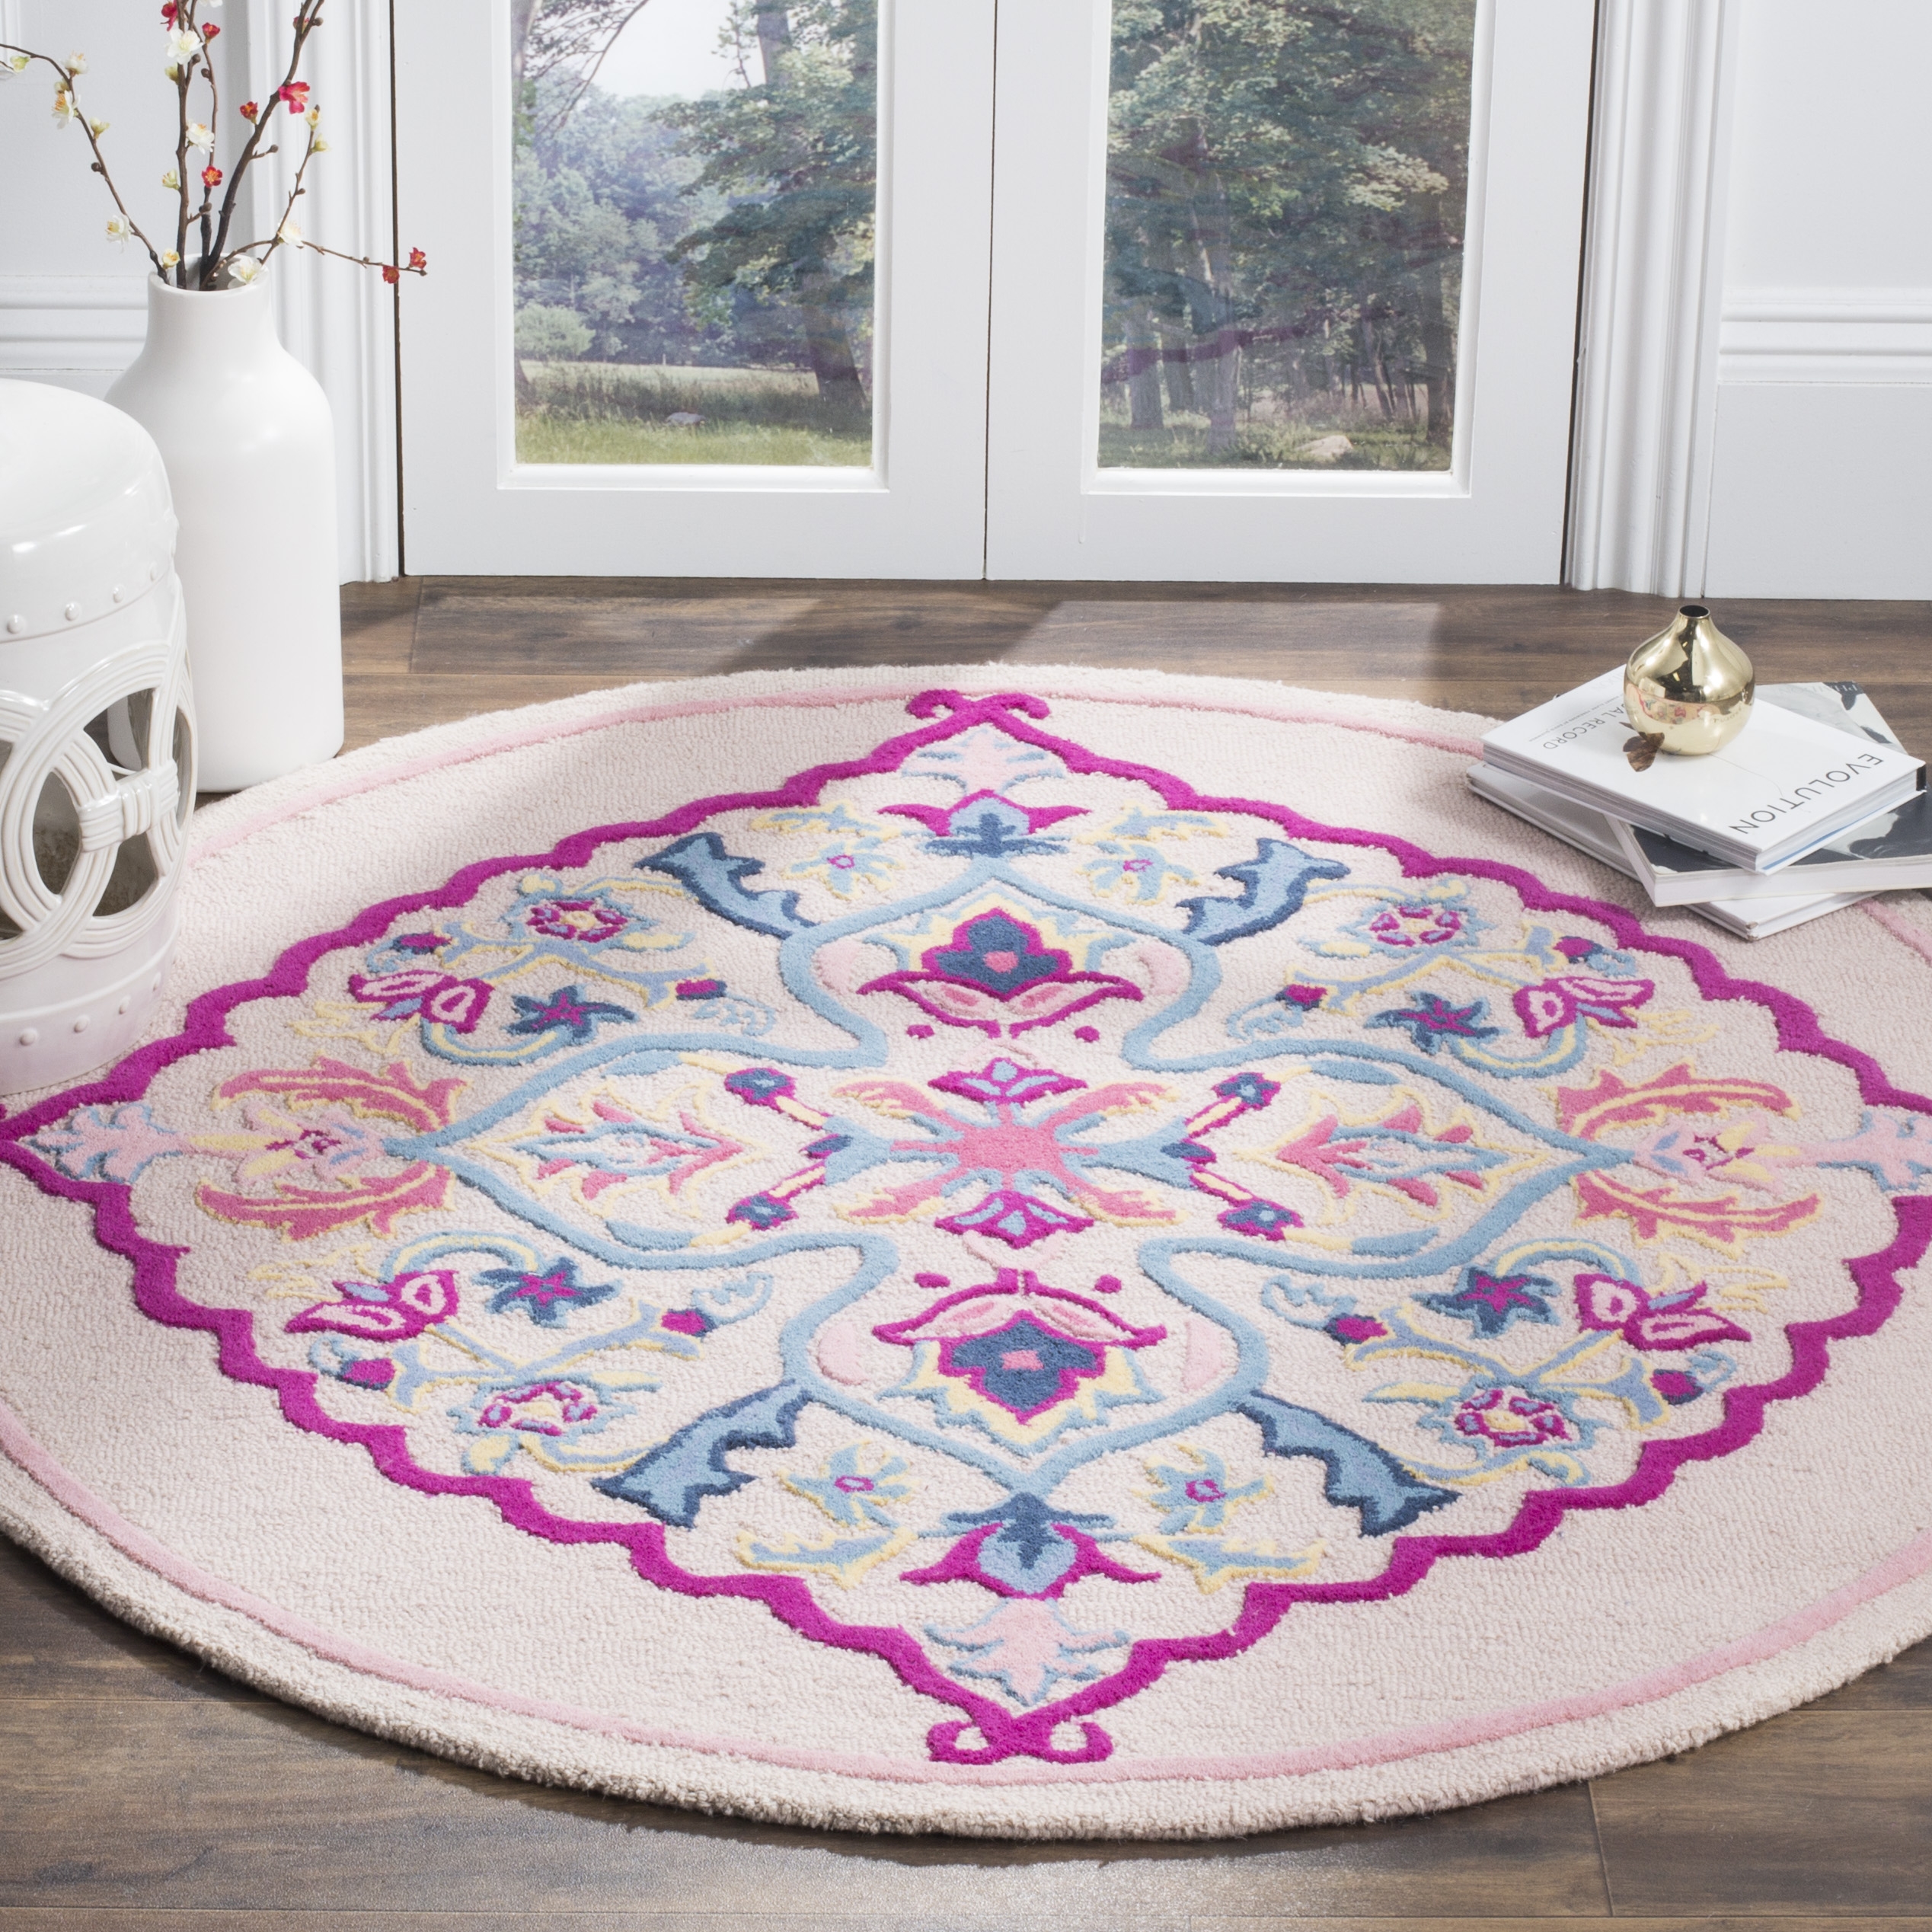 Arlo Home Hand Tufted Area Rug, BLG605E, Light Pink/Multi,  5' X 5' Round - Image 1